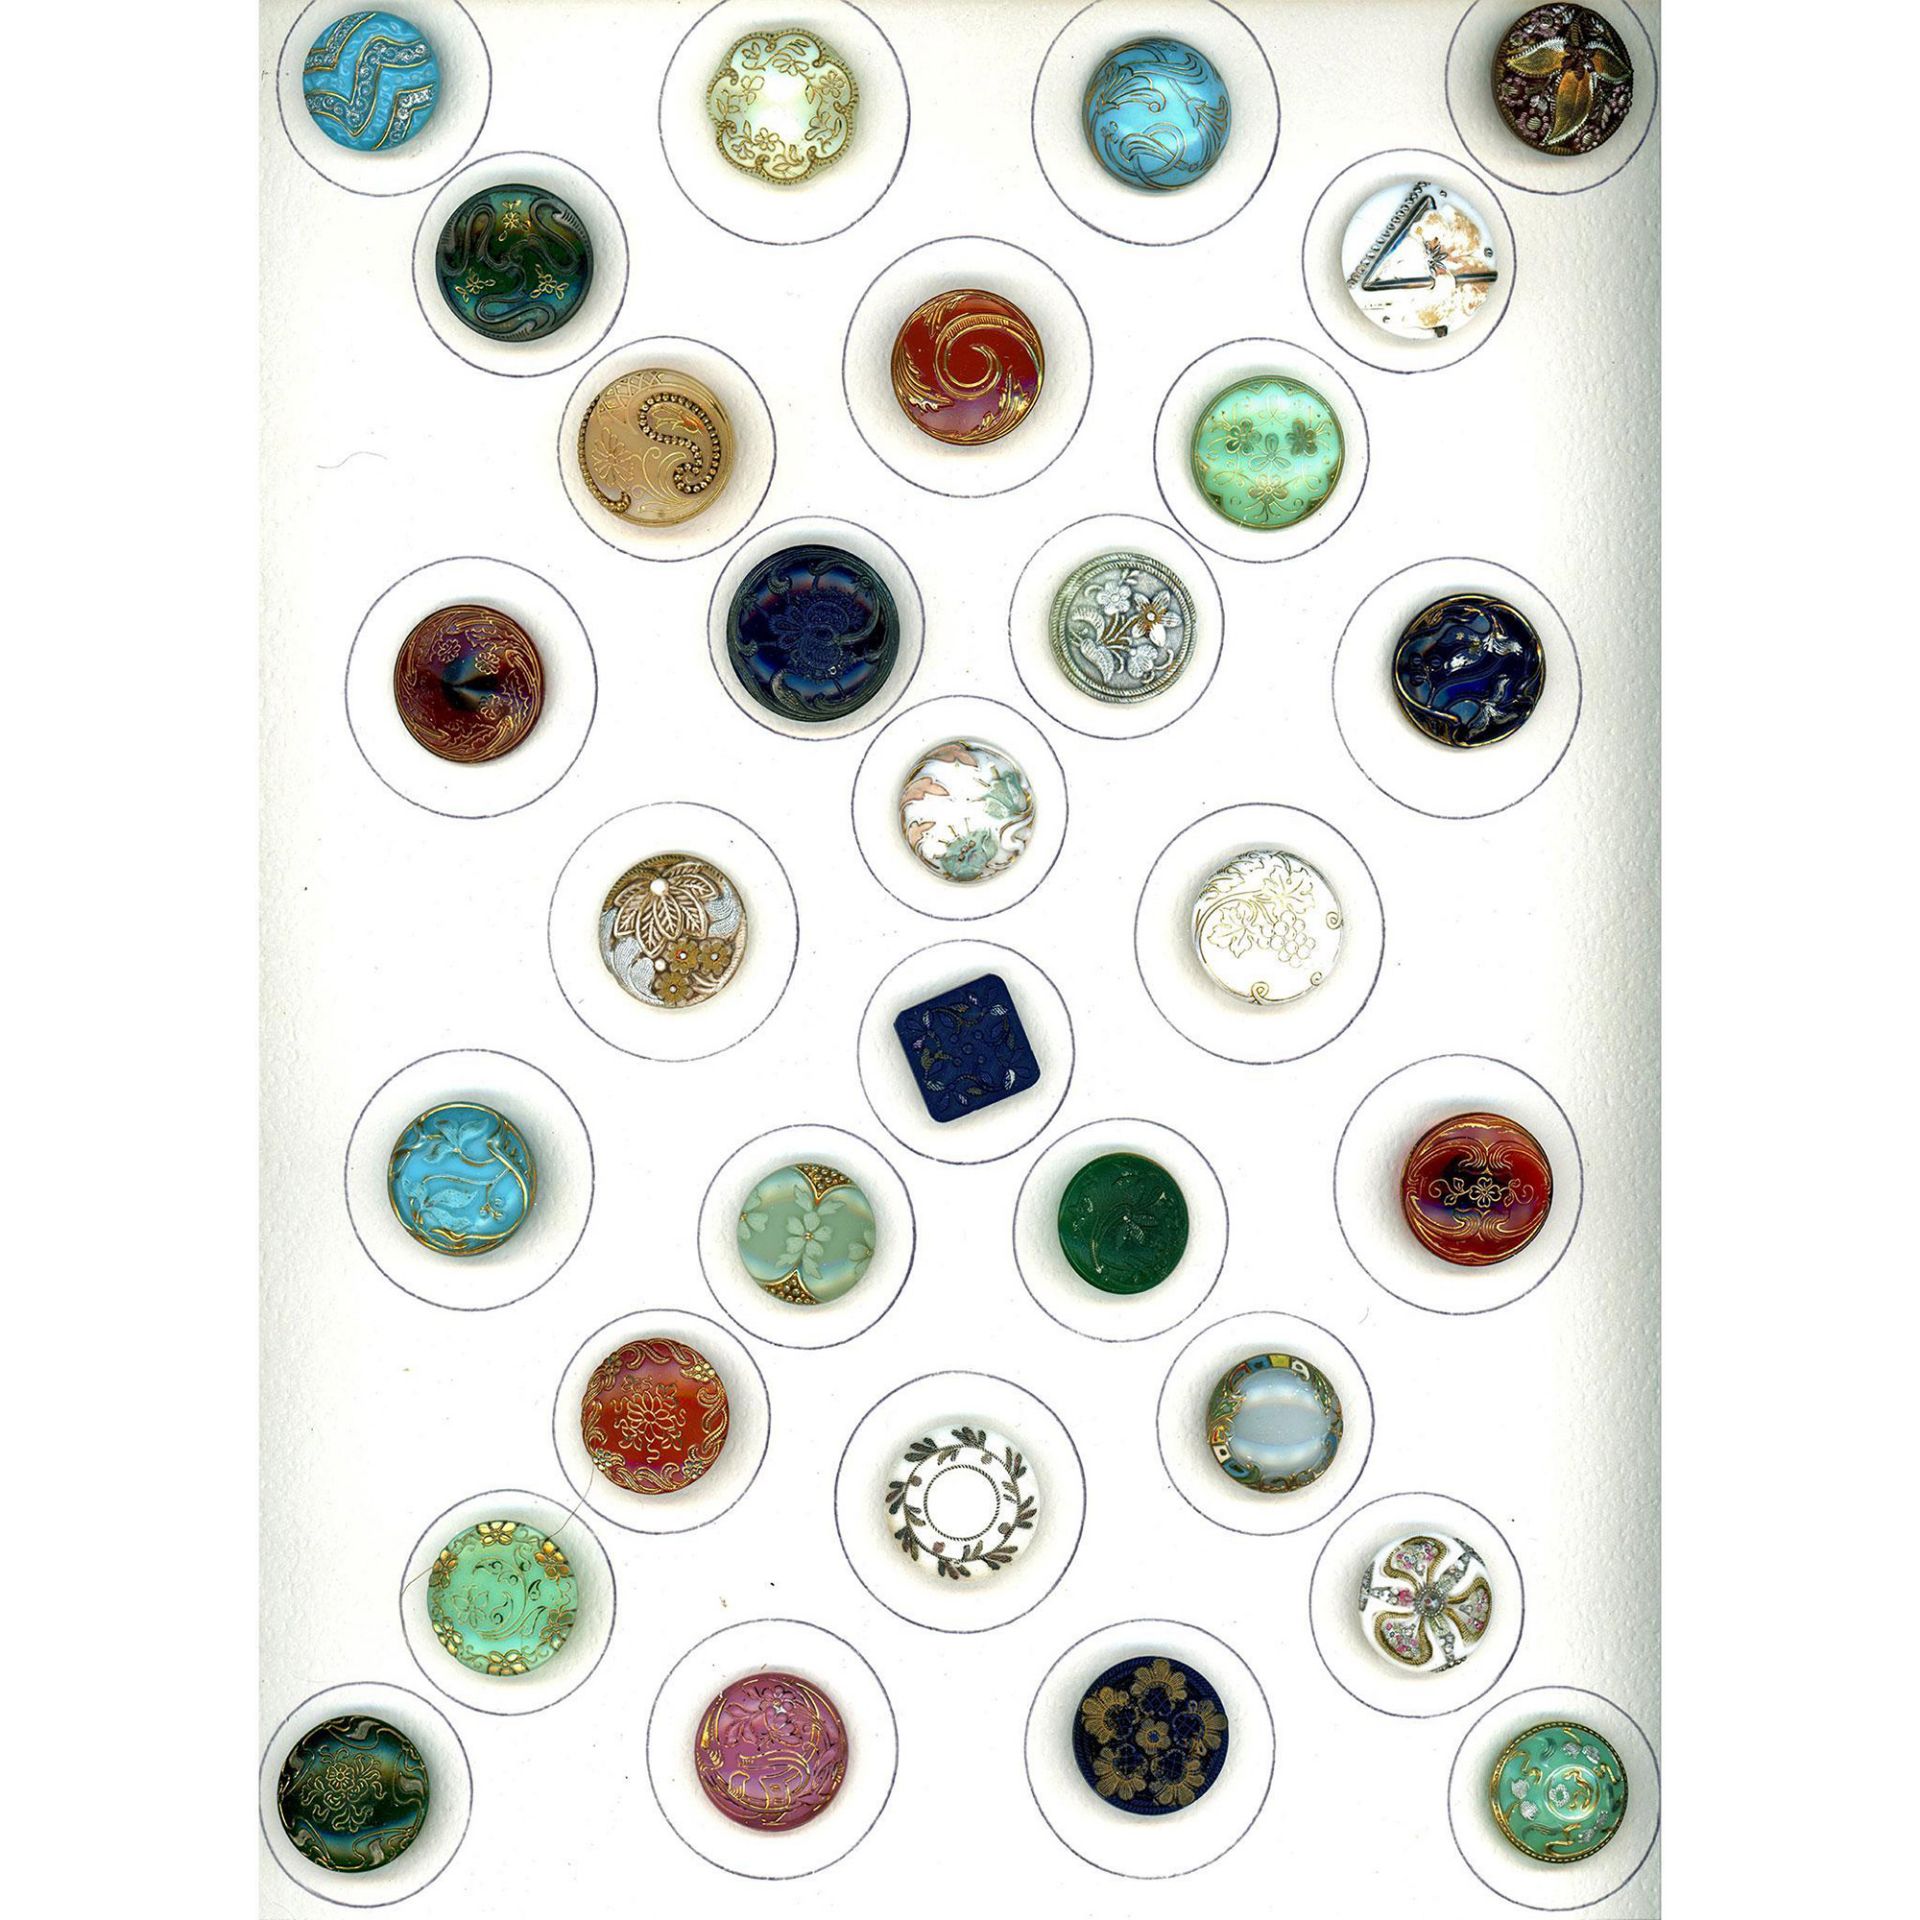 A Full Card of Victorian Glass Buttons